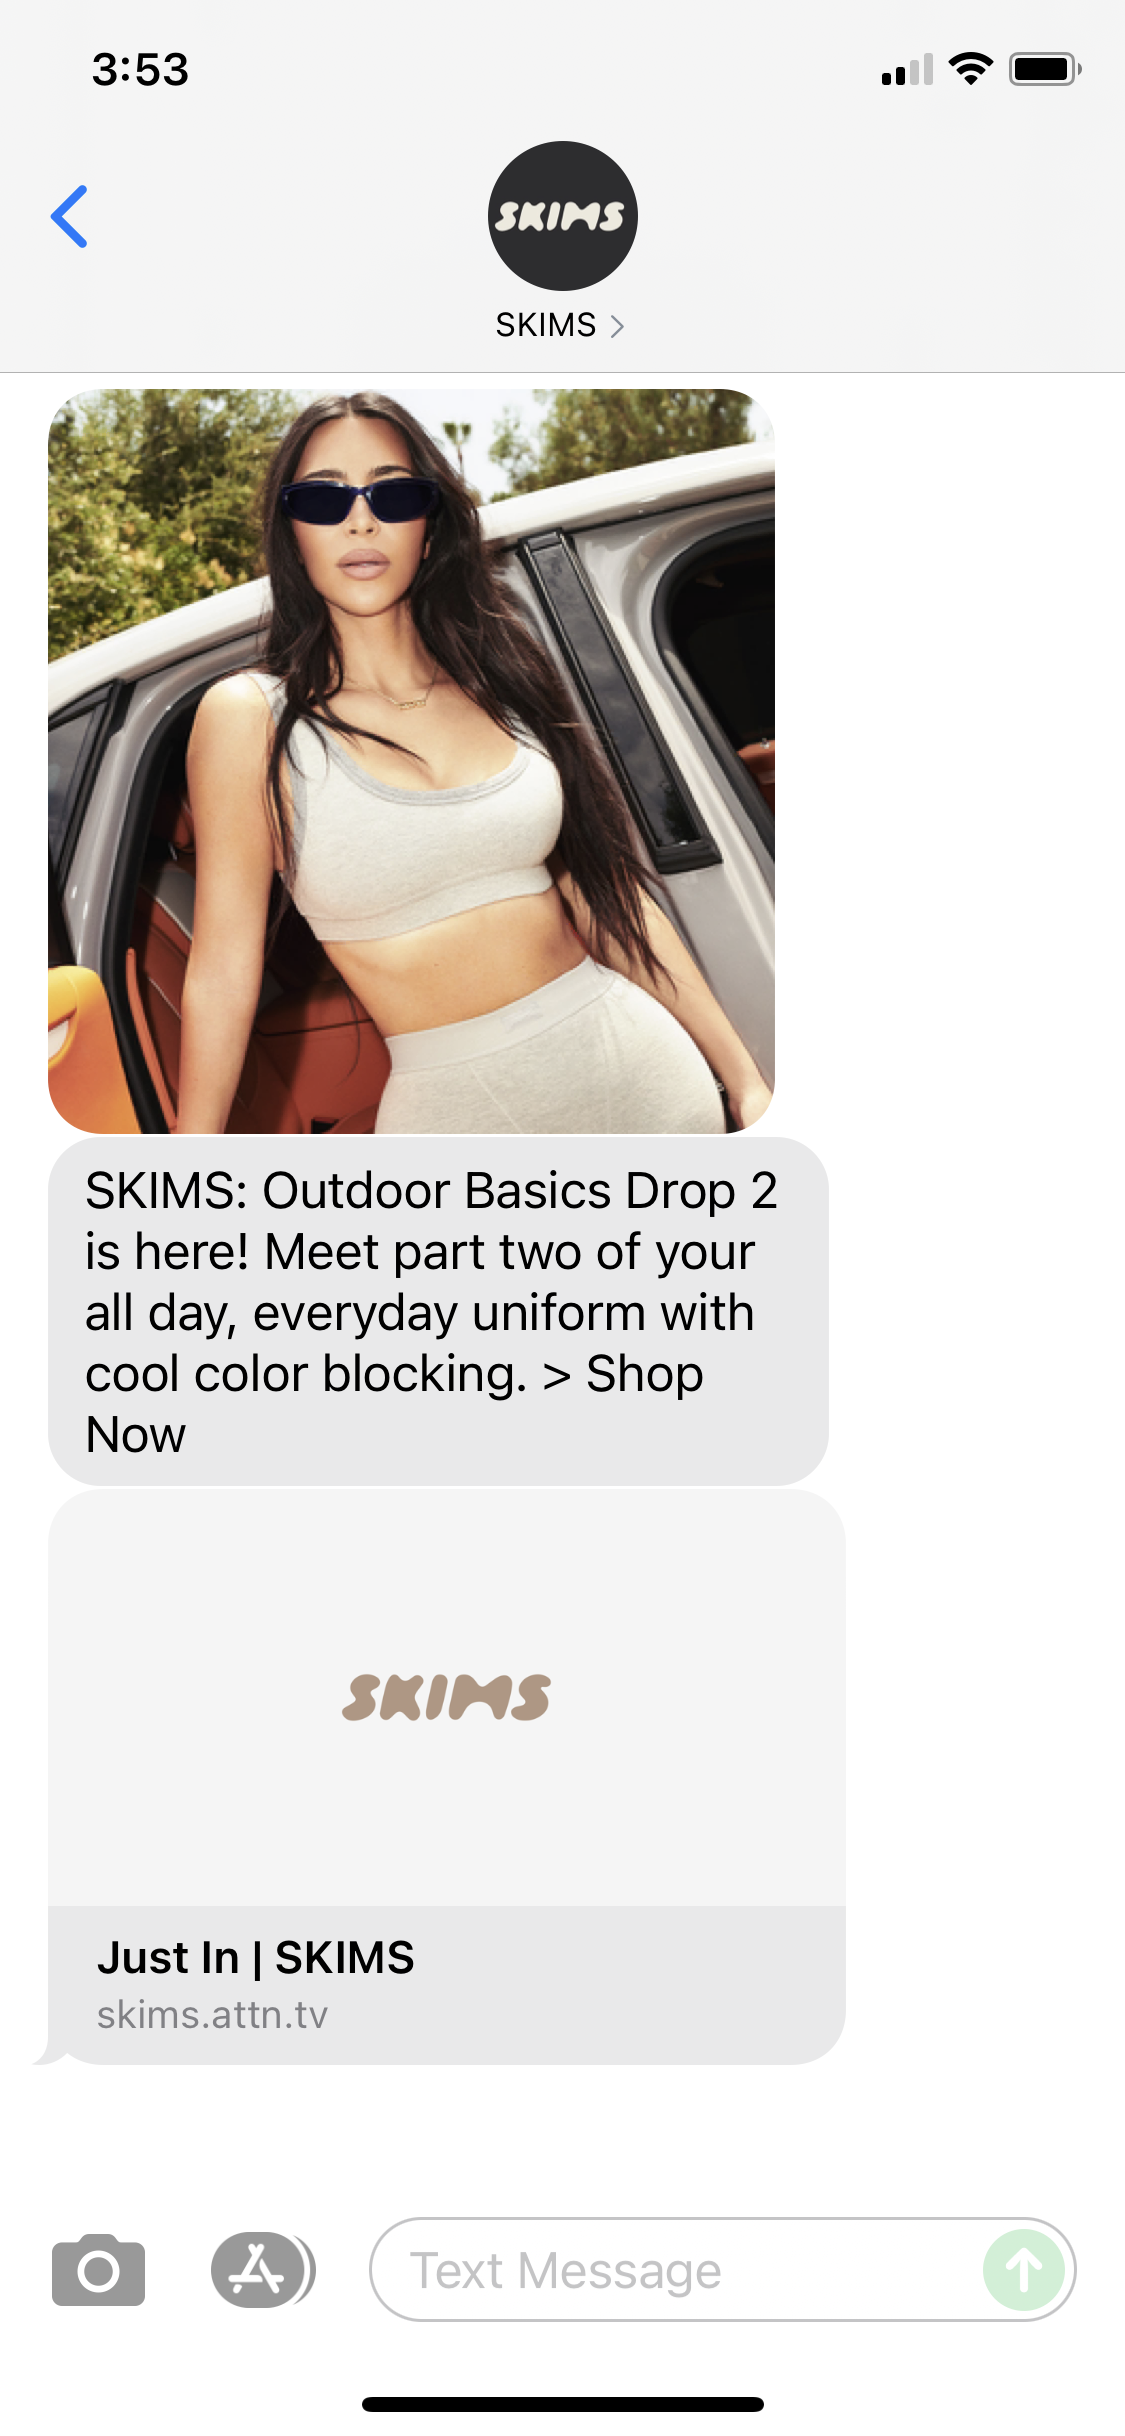 https://smsarchives.com/wp-content/uploads/2021/07/SKIMS-Text-Message-Marketing-Example-07.29.2021.png